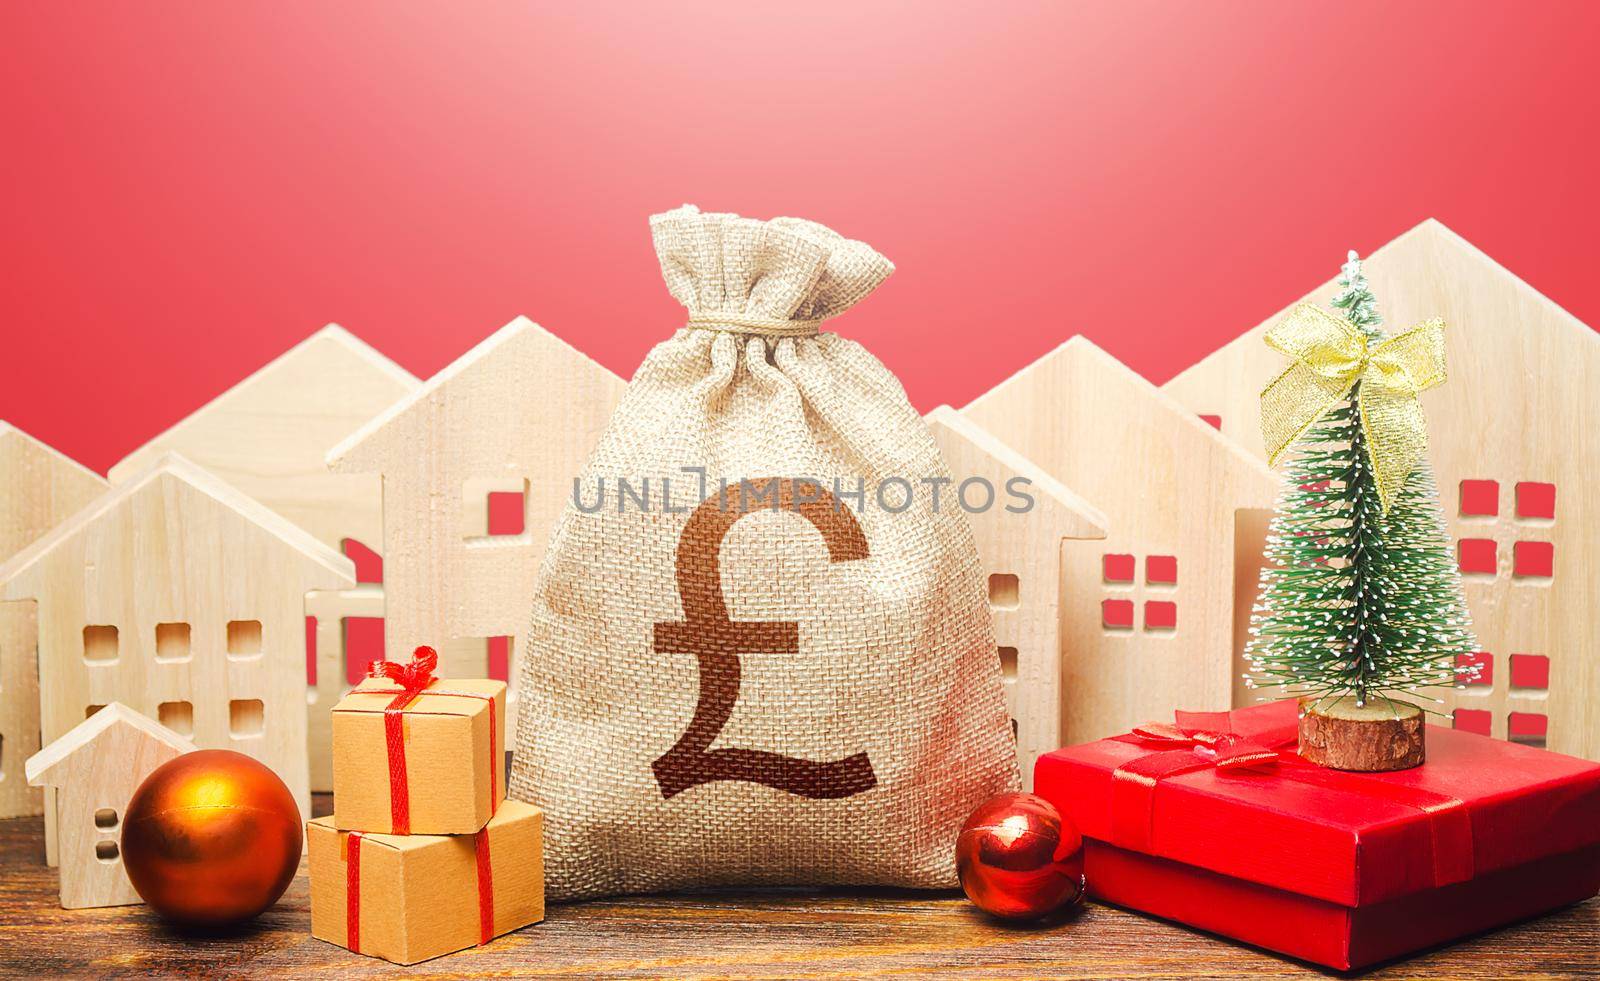 British pound sterling money bag and houses in a New Year's setting. New Year or Xmas winter holiday. Increase in investment attractiveness. Promotions, offers. Mortgage loans. Bank deposit